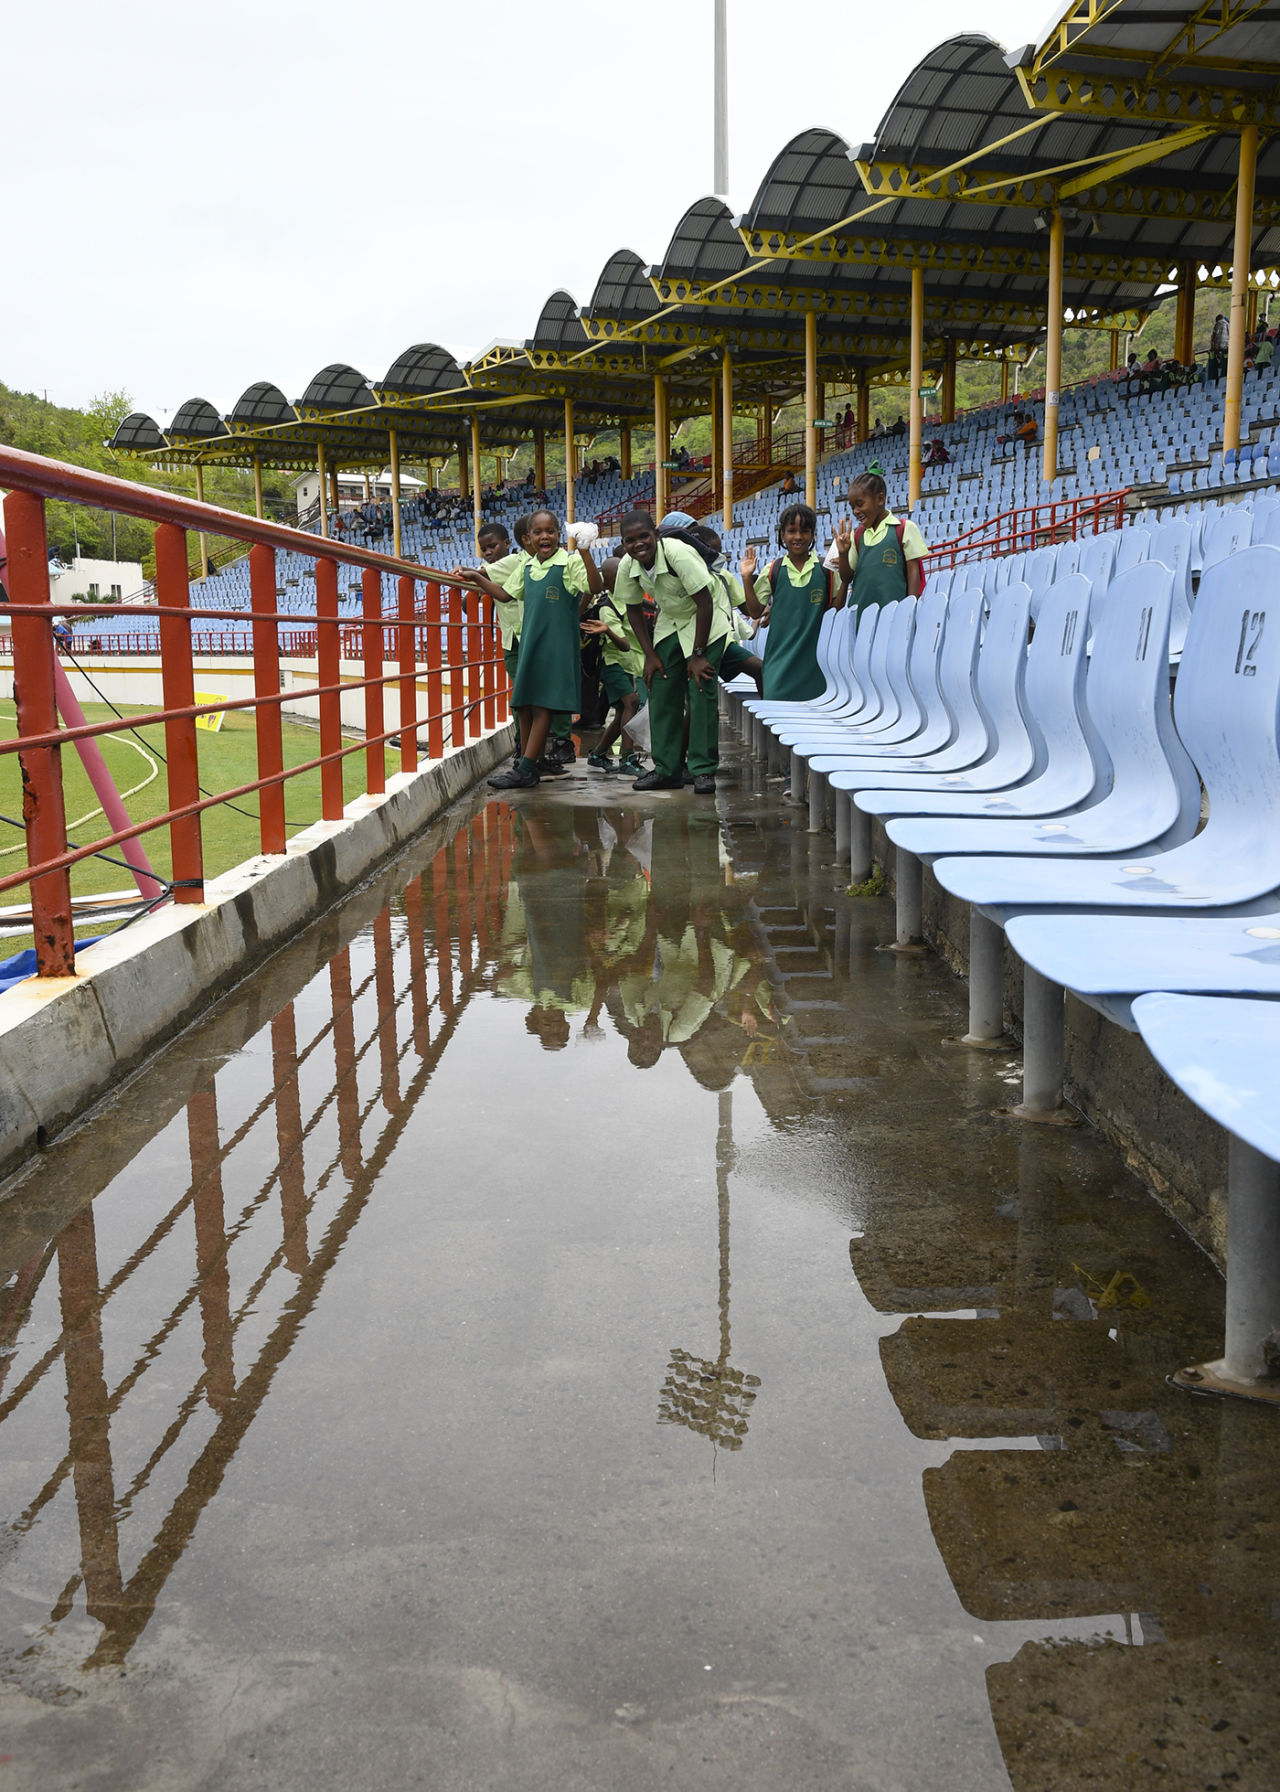 It was a wet day in Gros Islet, West Indies v Sri Lanka, 2nd Test, Gros Islet, 2nd day, June 15, 2018